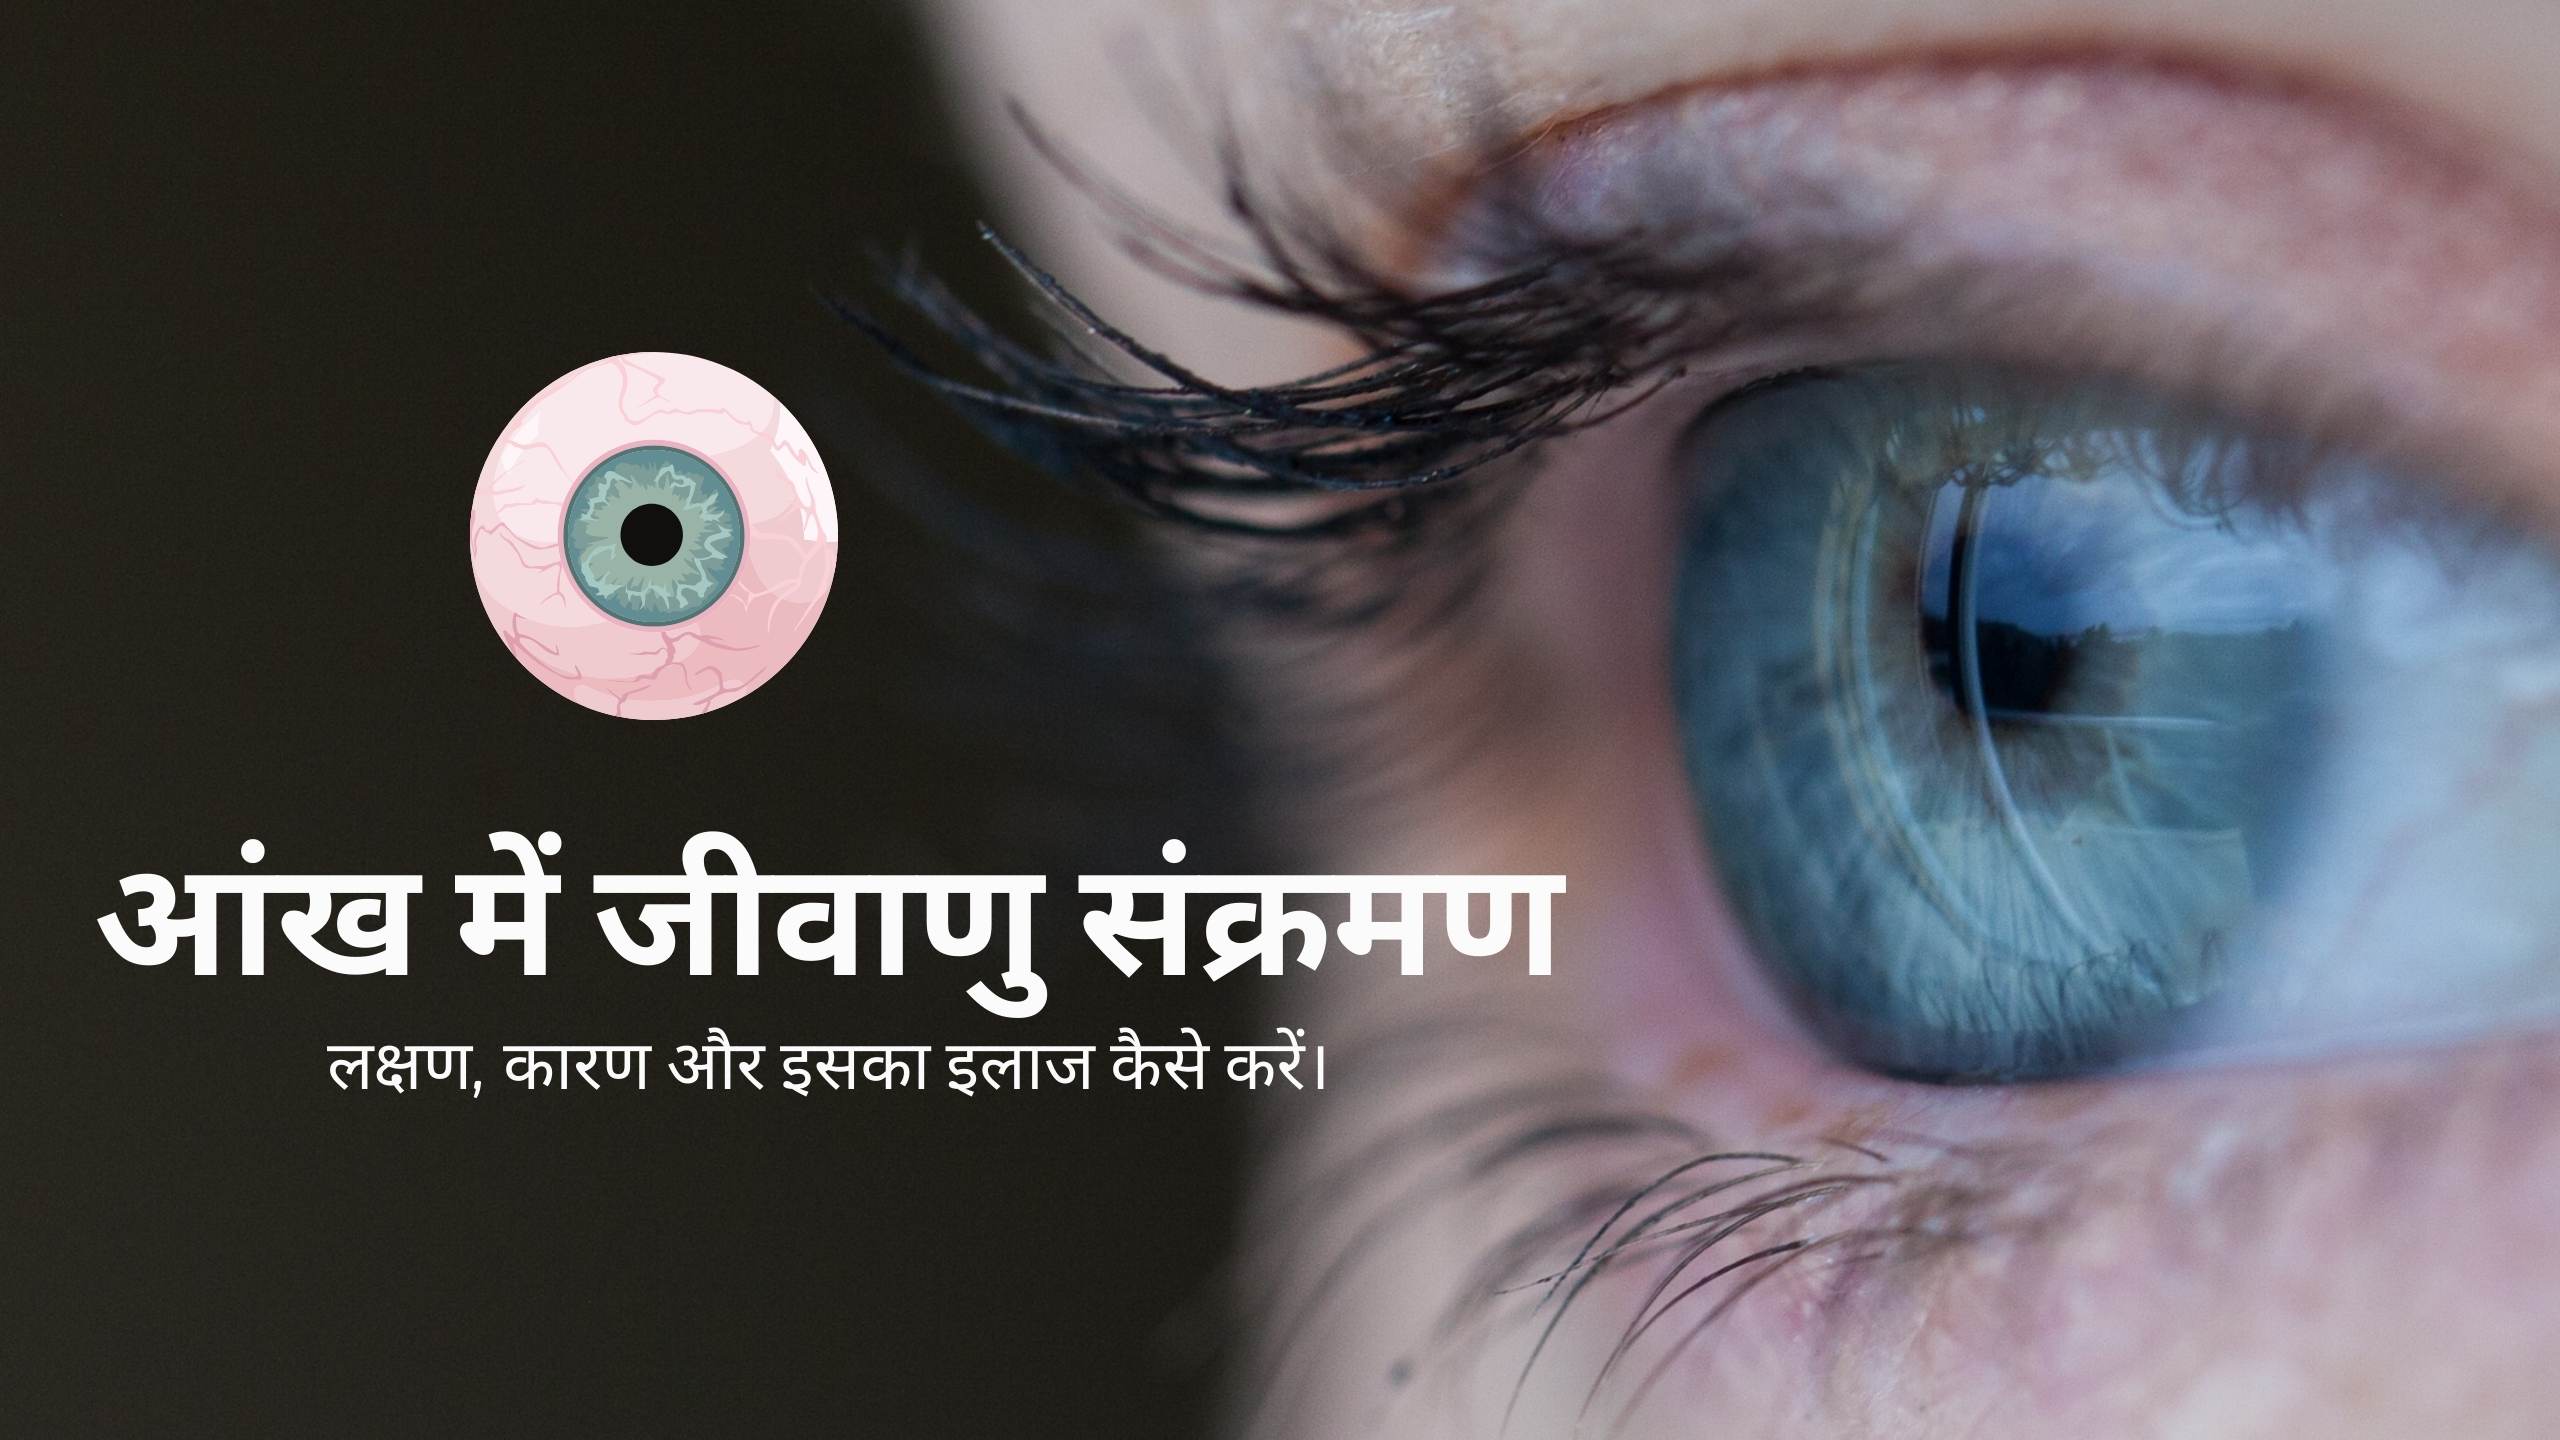 Bacterial infection in eye in hindi